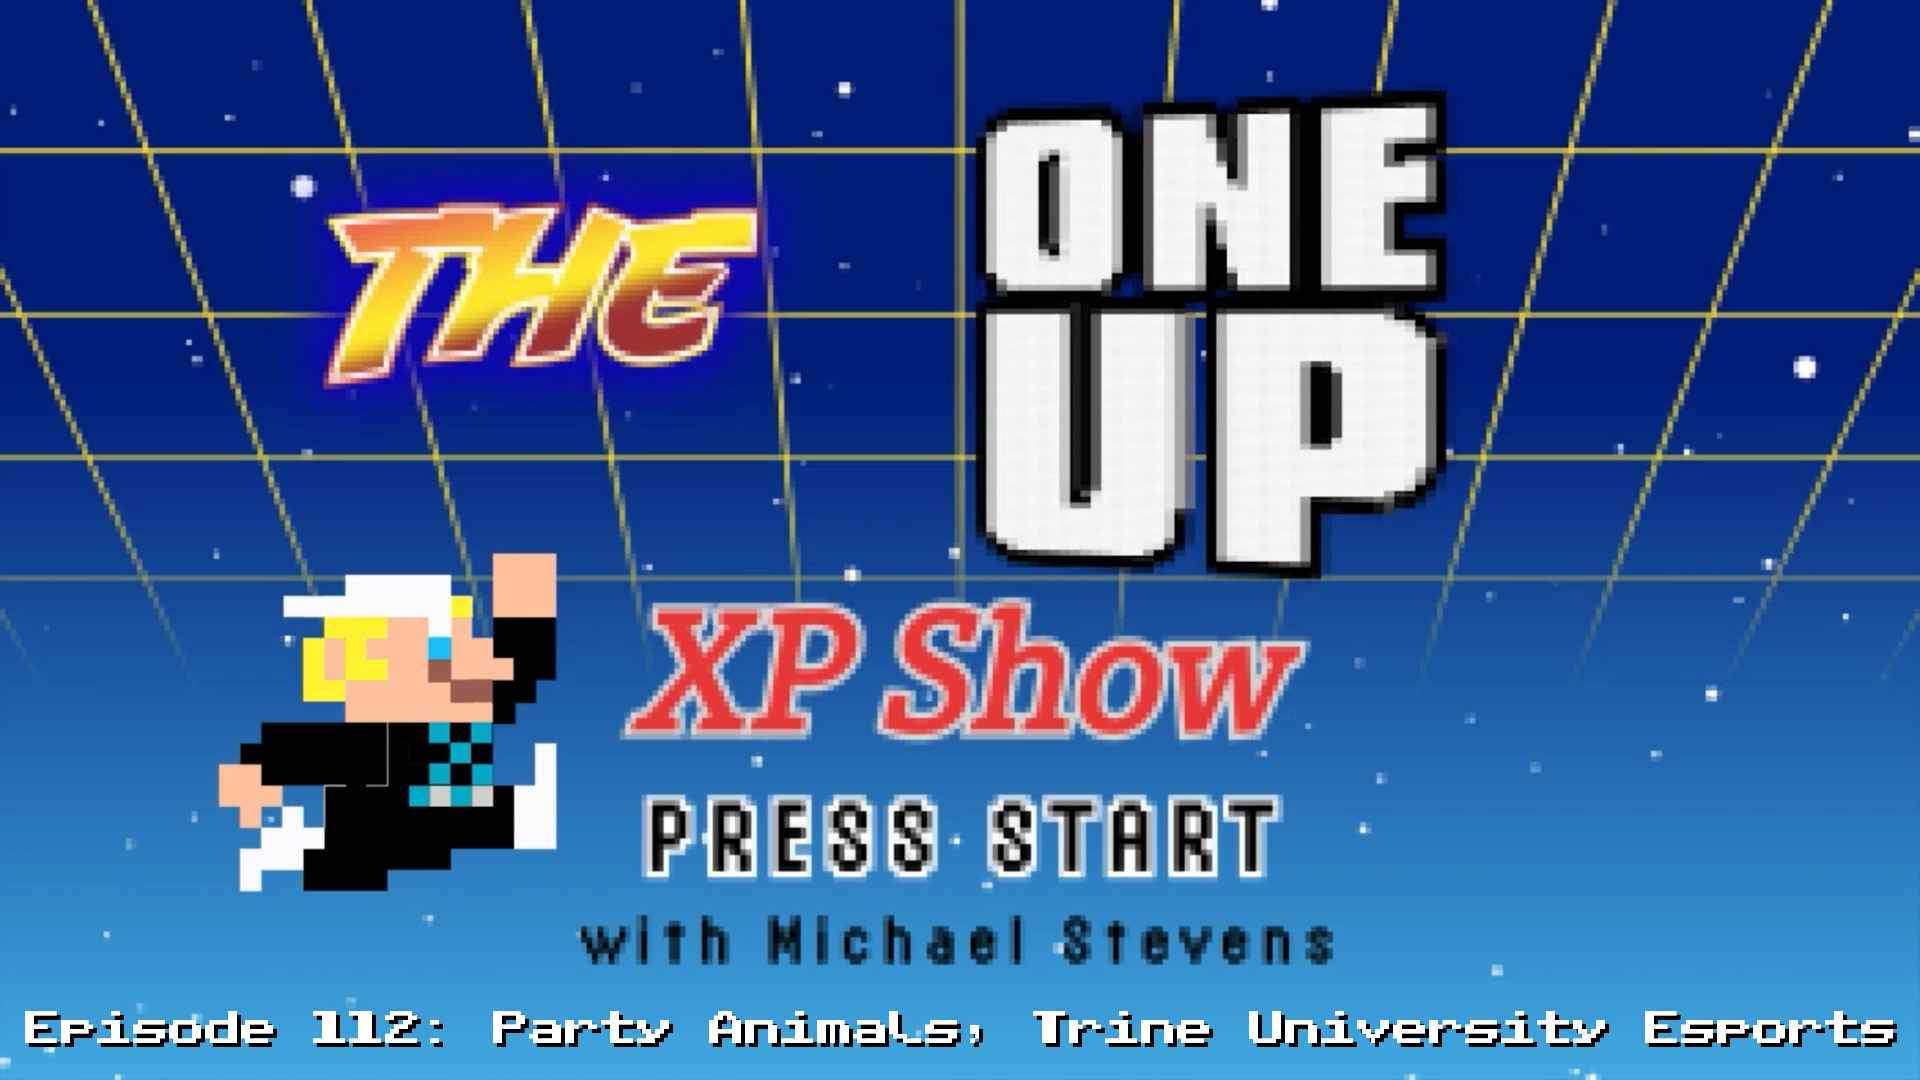 The One Up XP Show - Episode 112: Party Animals, Trine University Esports